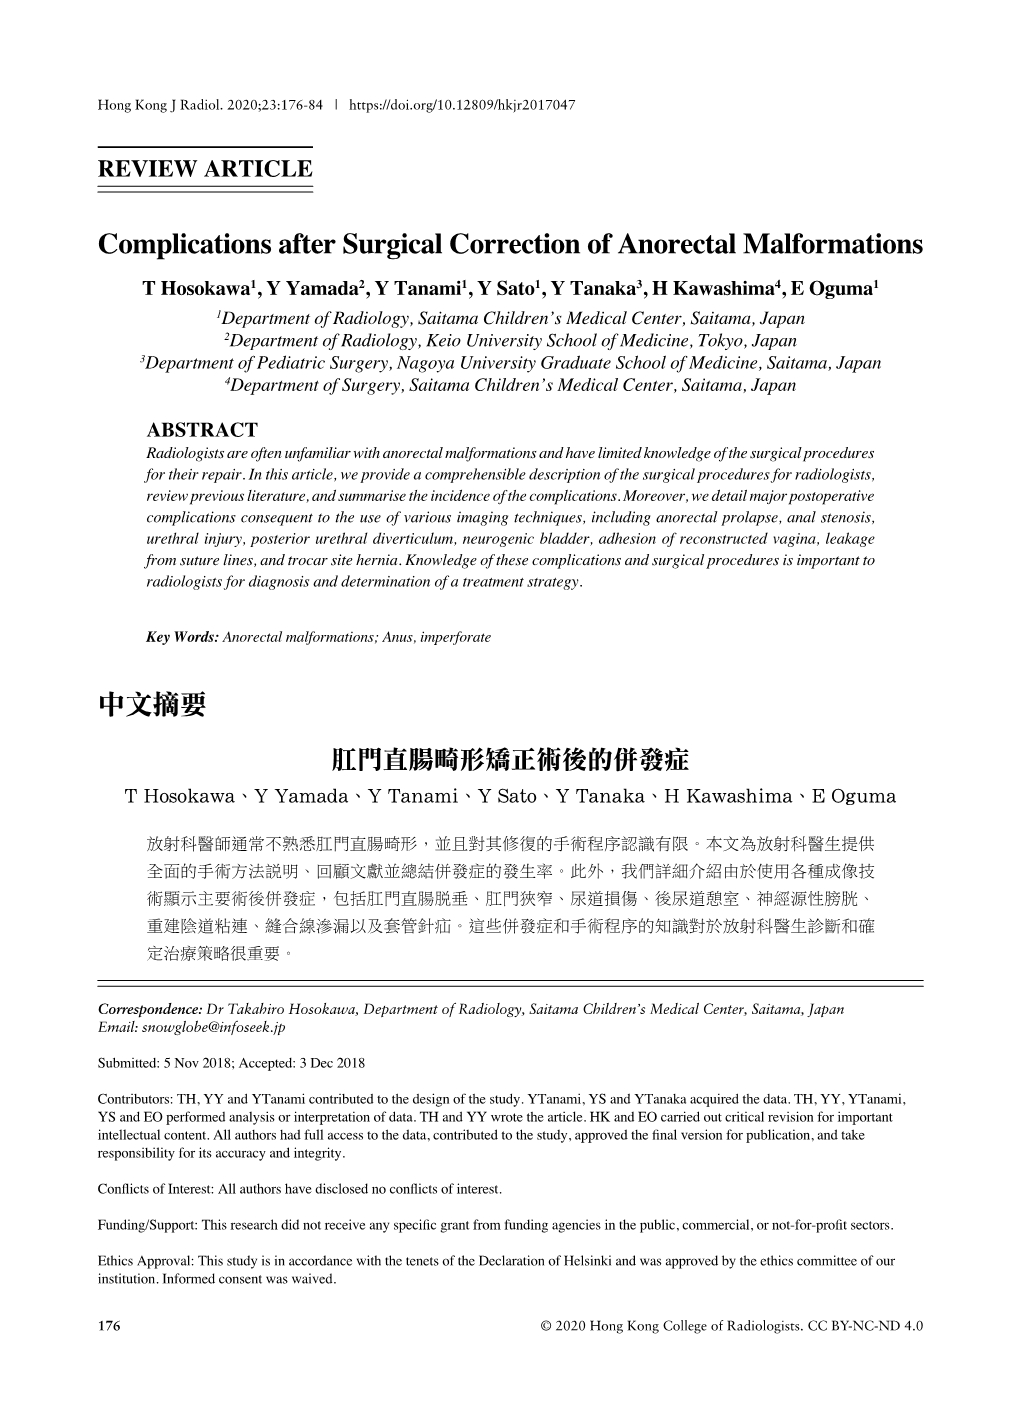 Complications After Surgical Correction of Anorectal Malformations